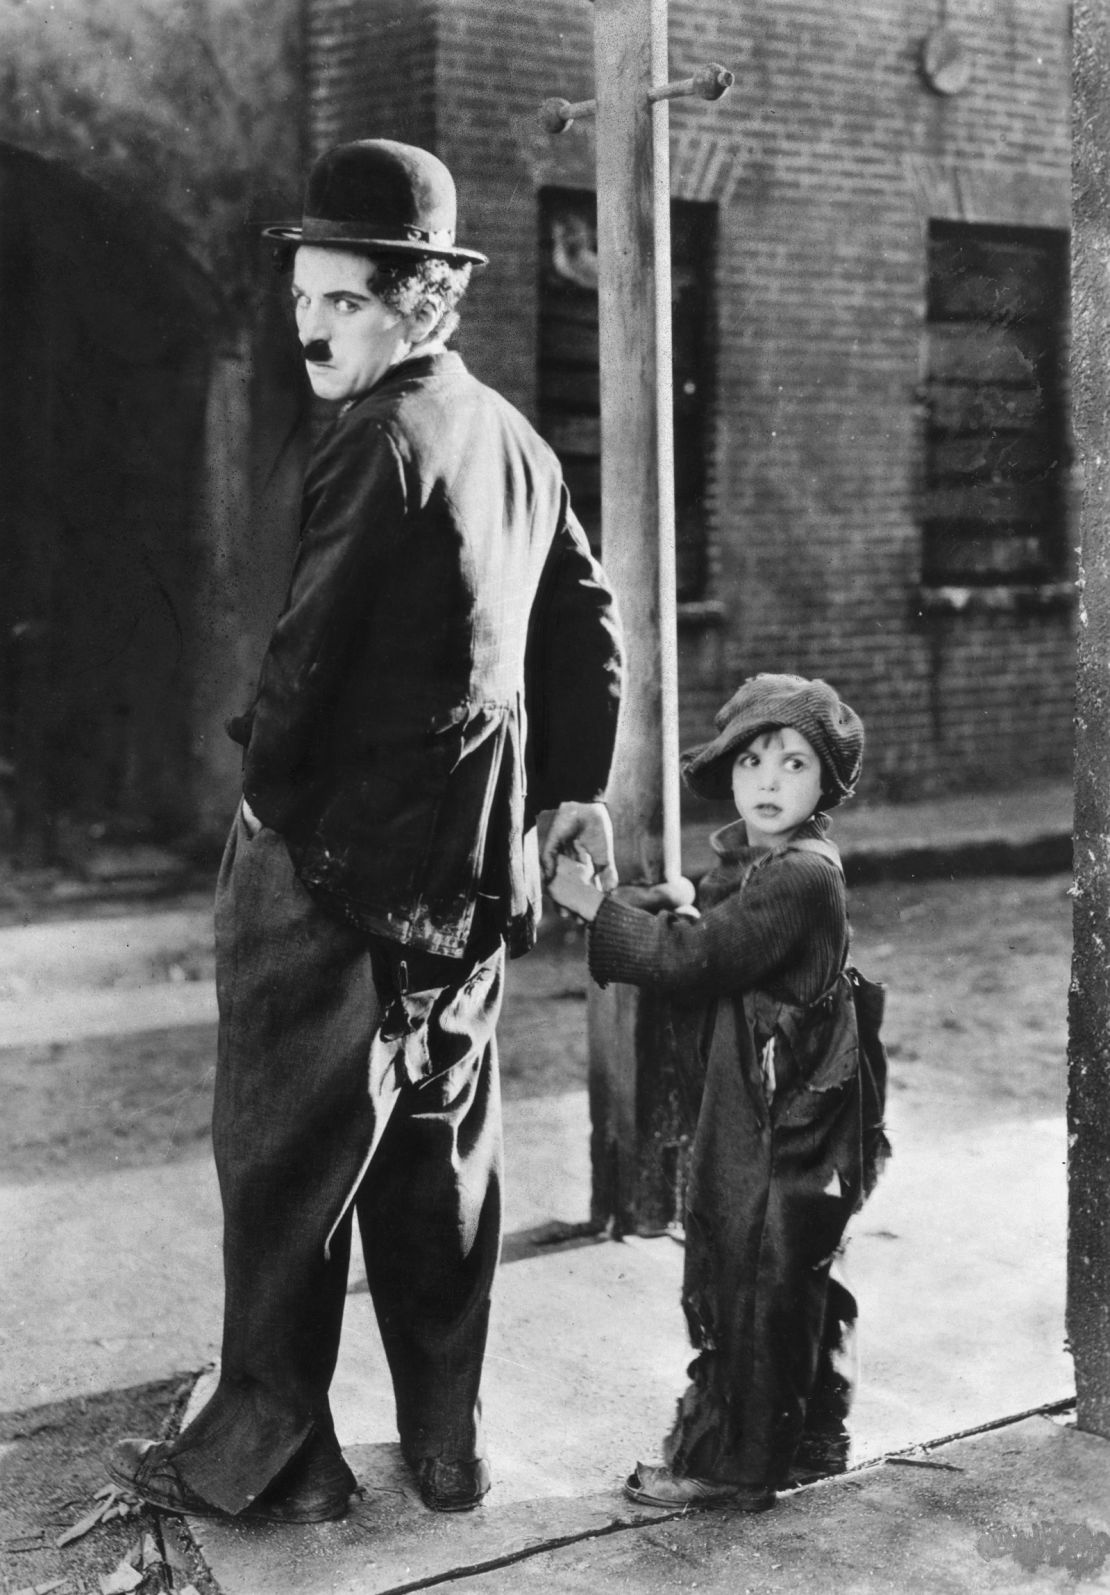 Jackie Coogan in The Kid. Coogan had a lucrative career, but found out when he turned 21 that his parents left him with none of the earnings, according to SAG.